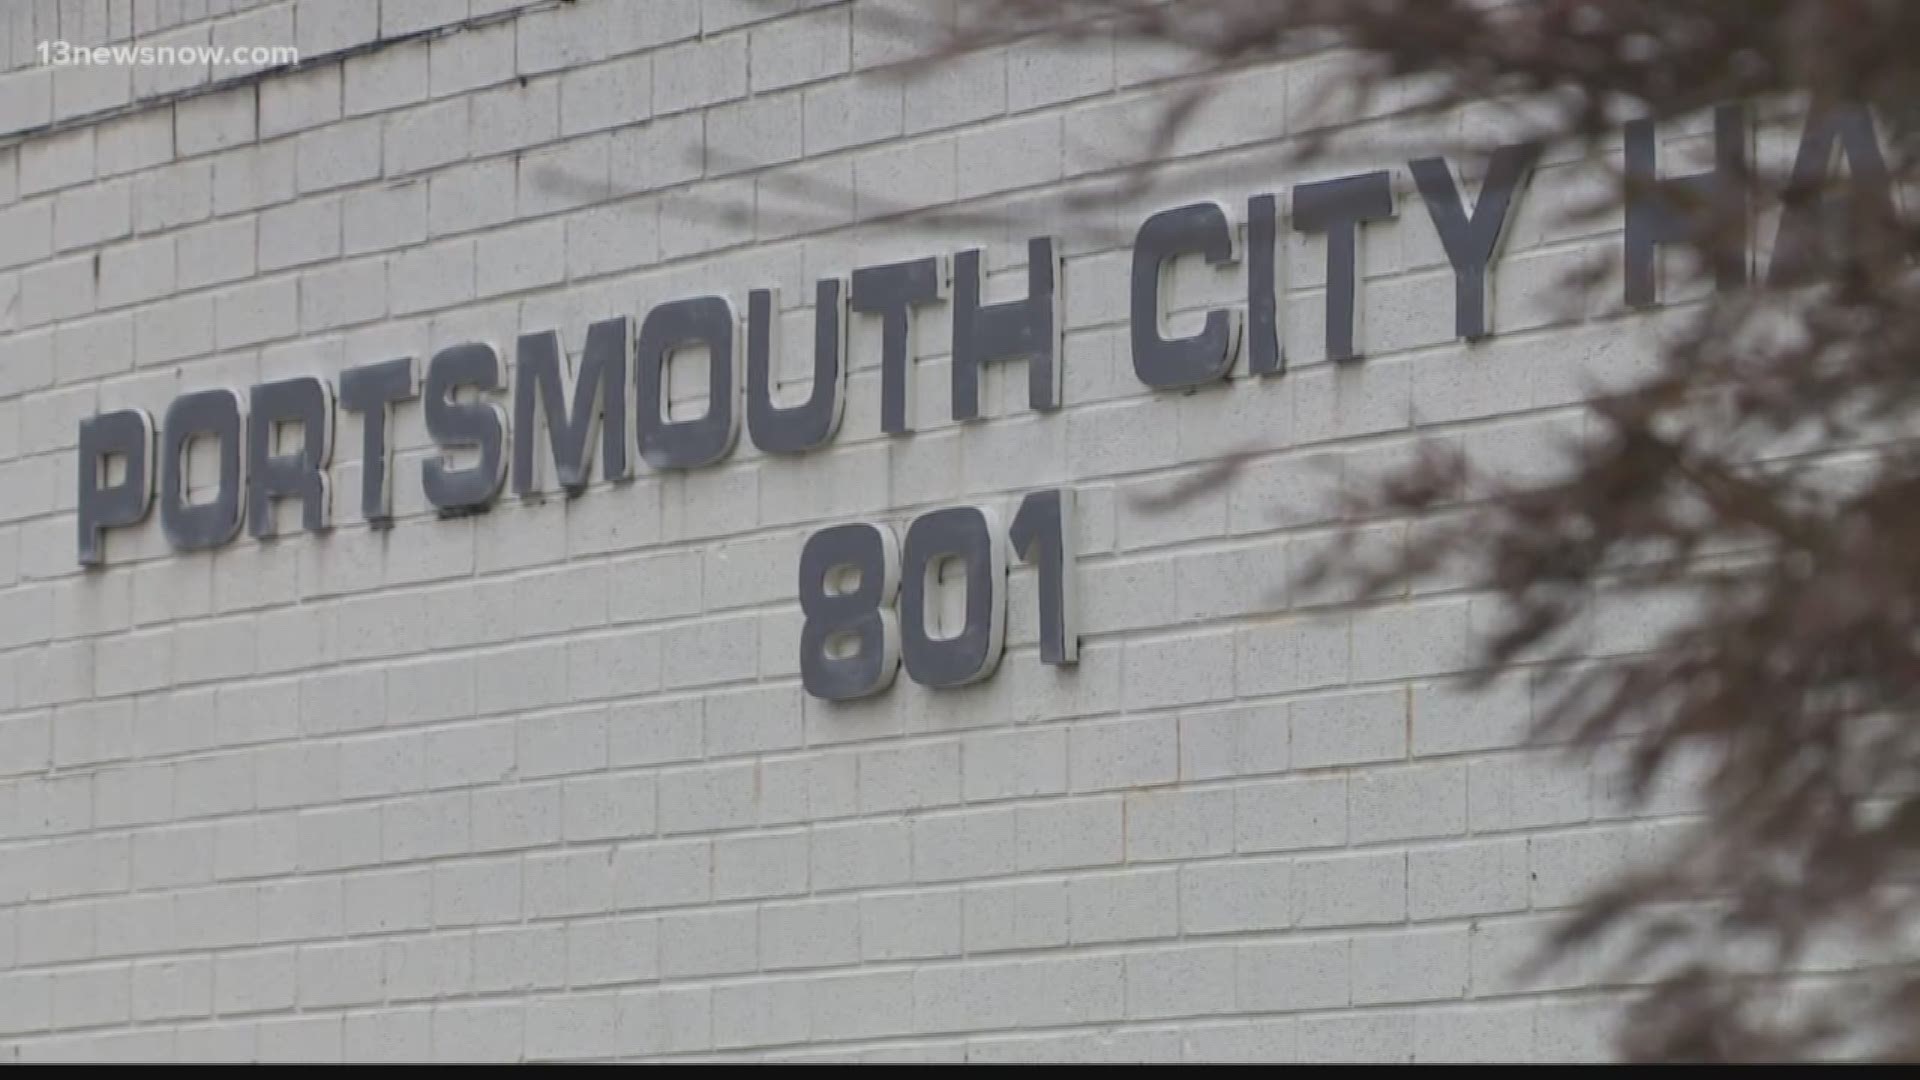 The Portsmouth City Council is voting to give city employees bonuses in time for the holidays, but the same amount needed for the bonuses was requested by the school board to give teachers a 2% raise, that request was denied.